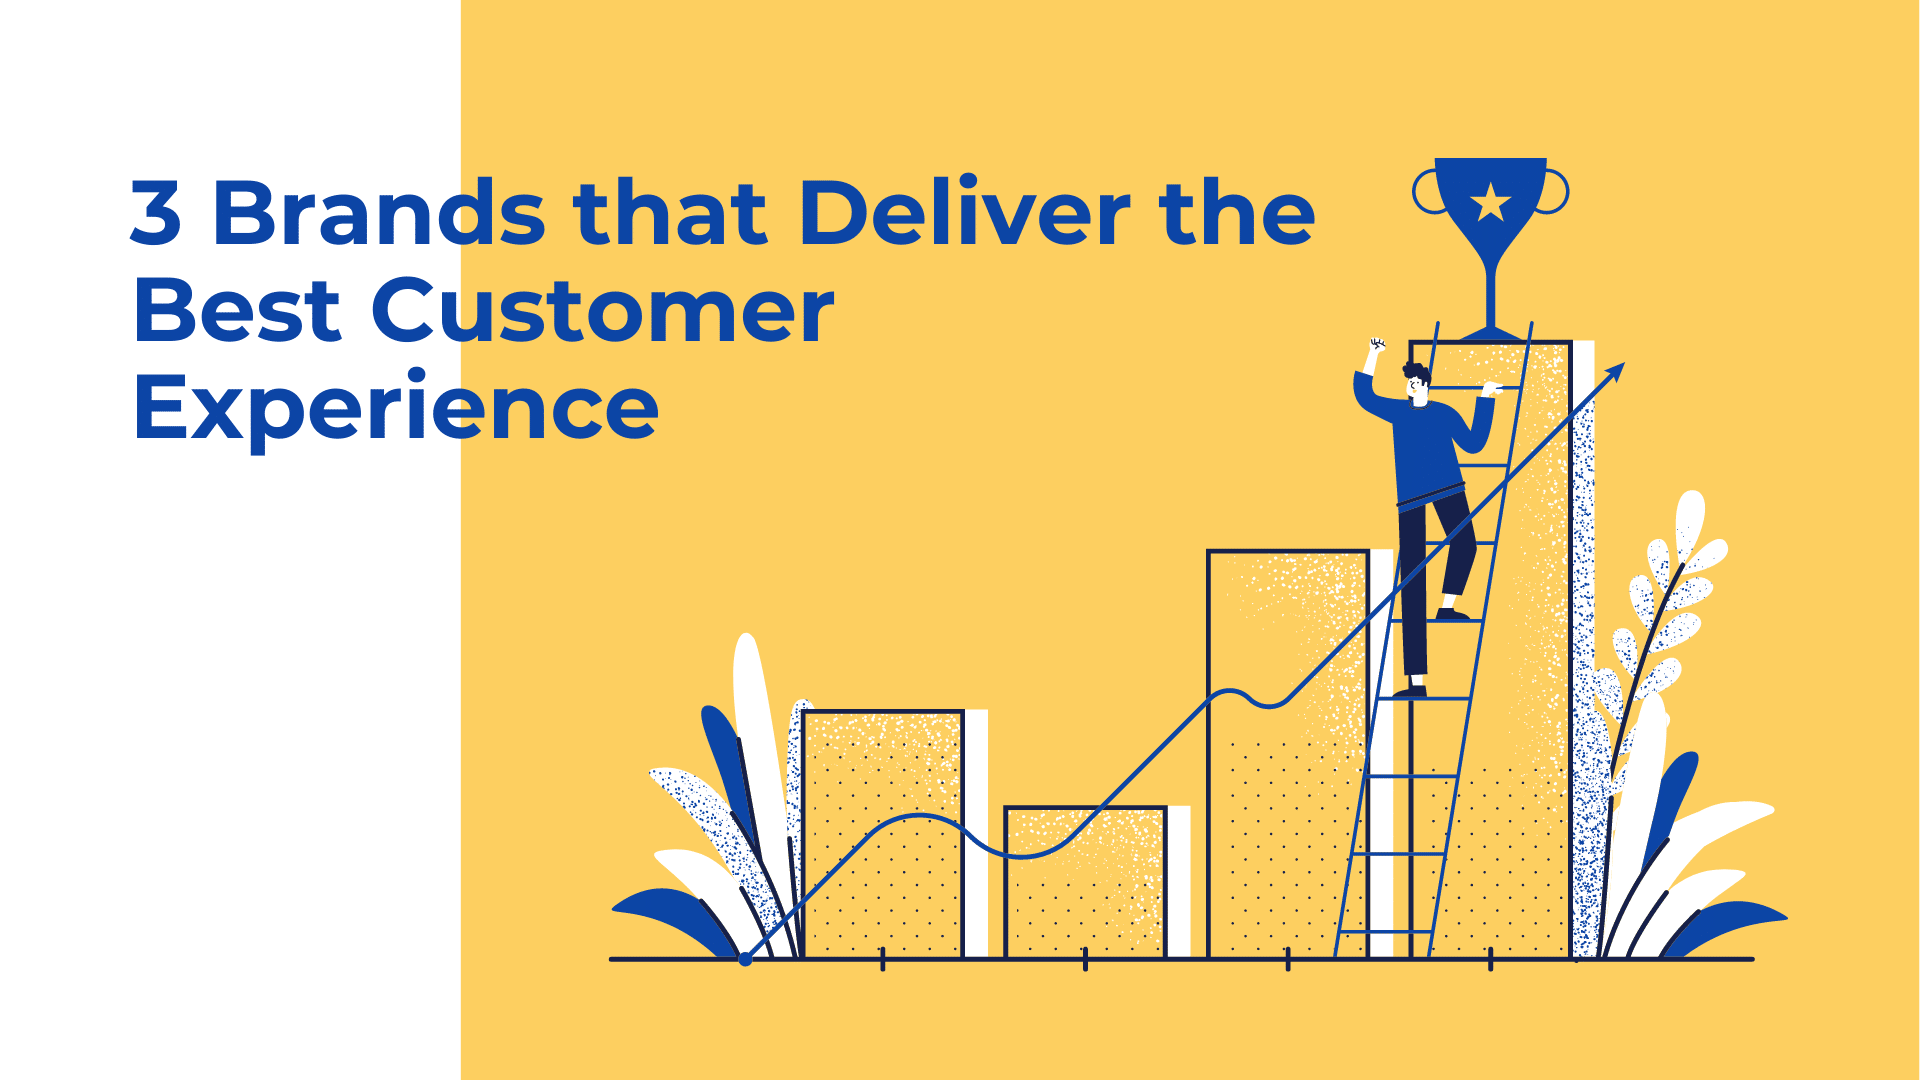 3 Brands that Deliver the Best Customer Experience